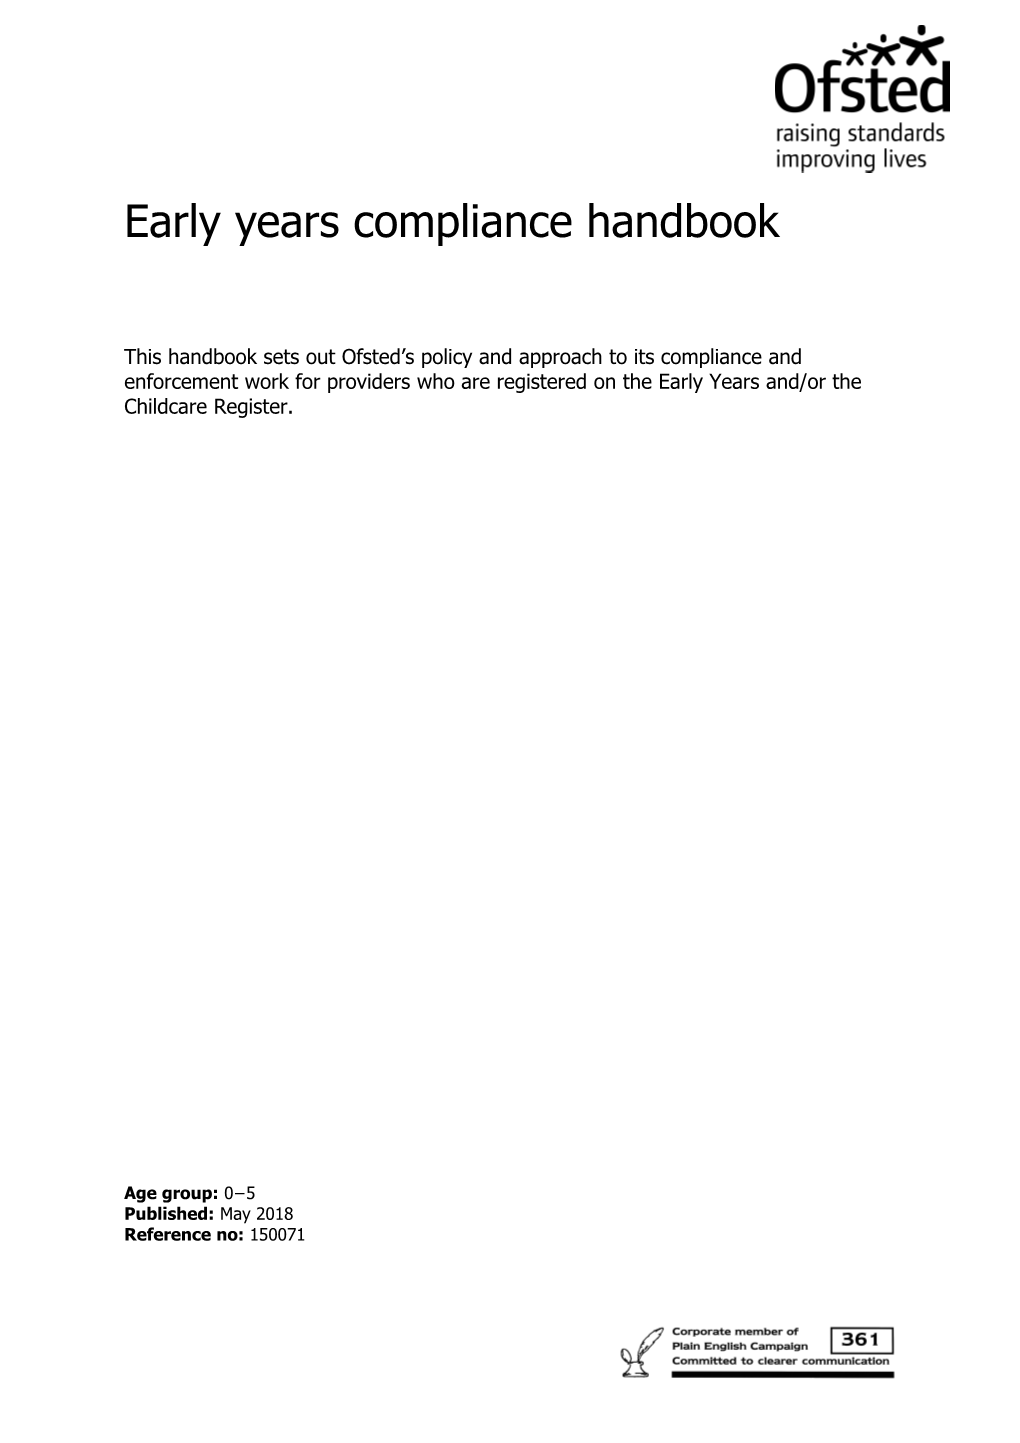 Early Years: Ofsted Compliance Handbook